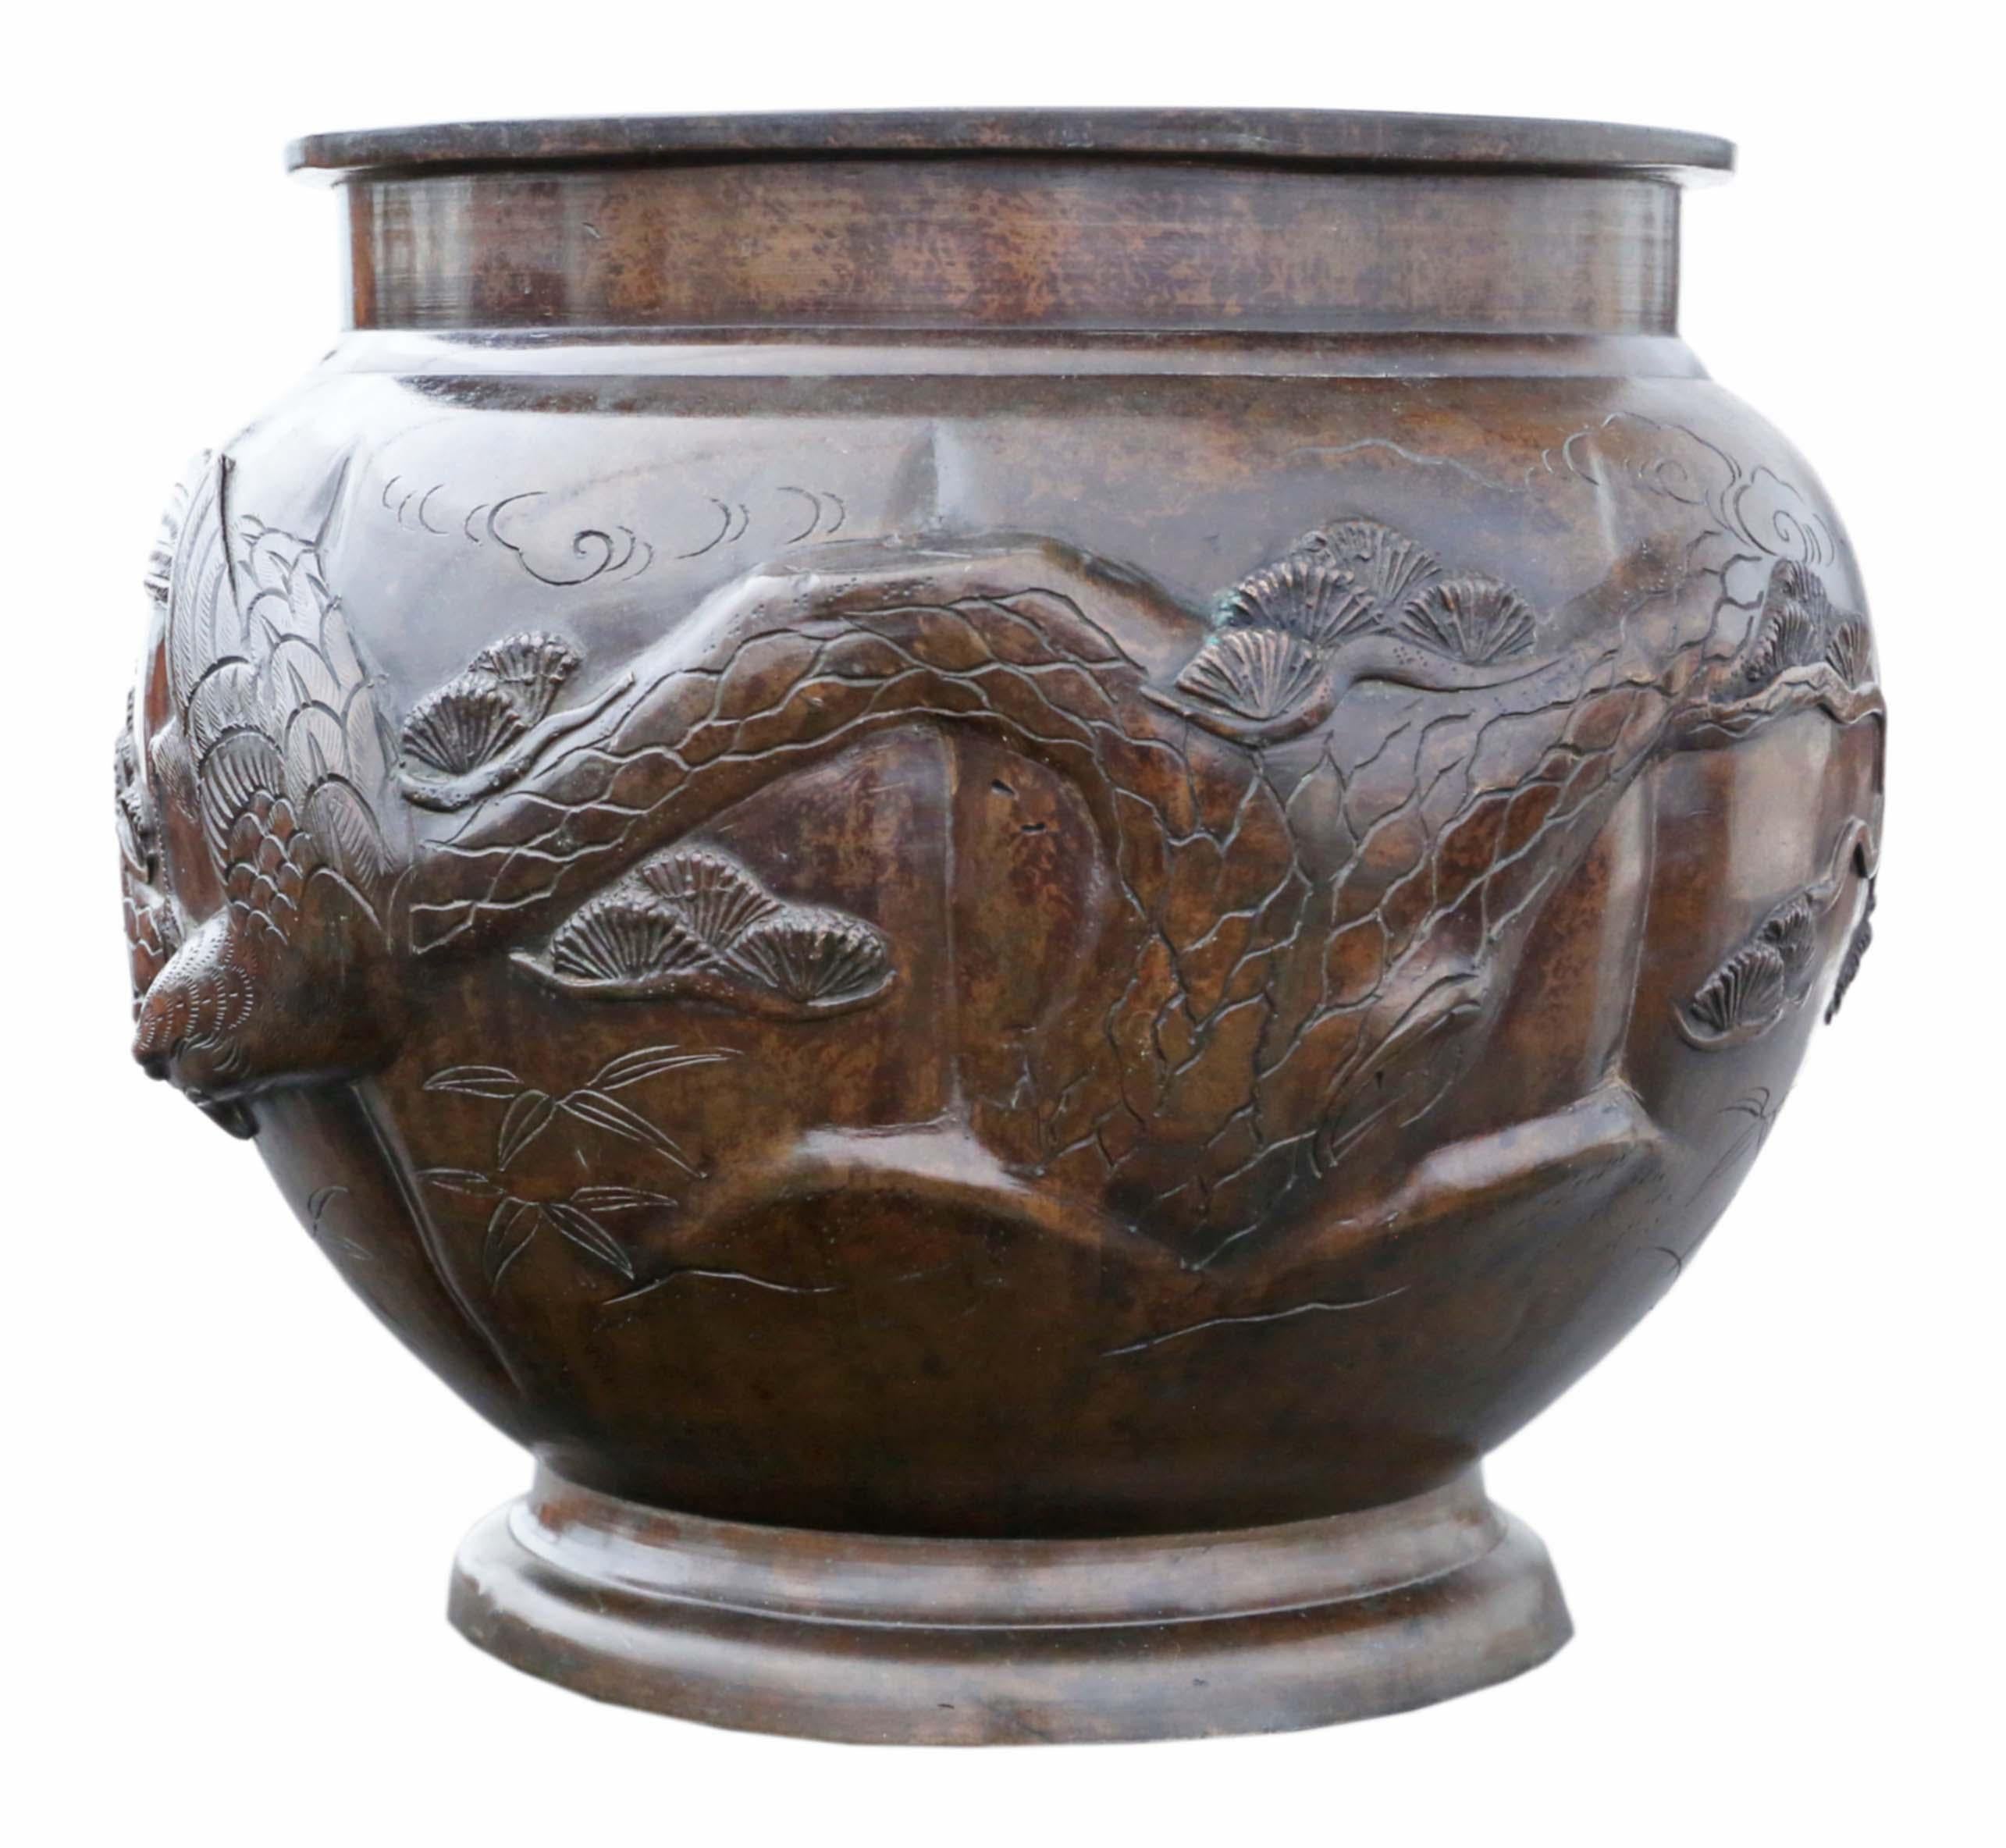 Antique large fine quality Oriental Japanese bronze Jardinière planter bowl censor 19th Century Meiji Period. Signed artist piece.

Would look amazing in the right location and make a fabulous centre piece. Rare large size and design. Truly